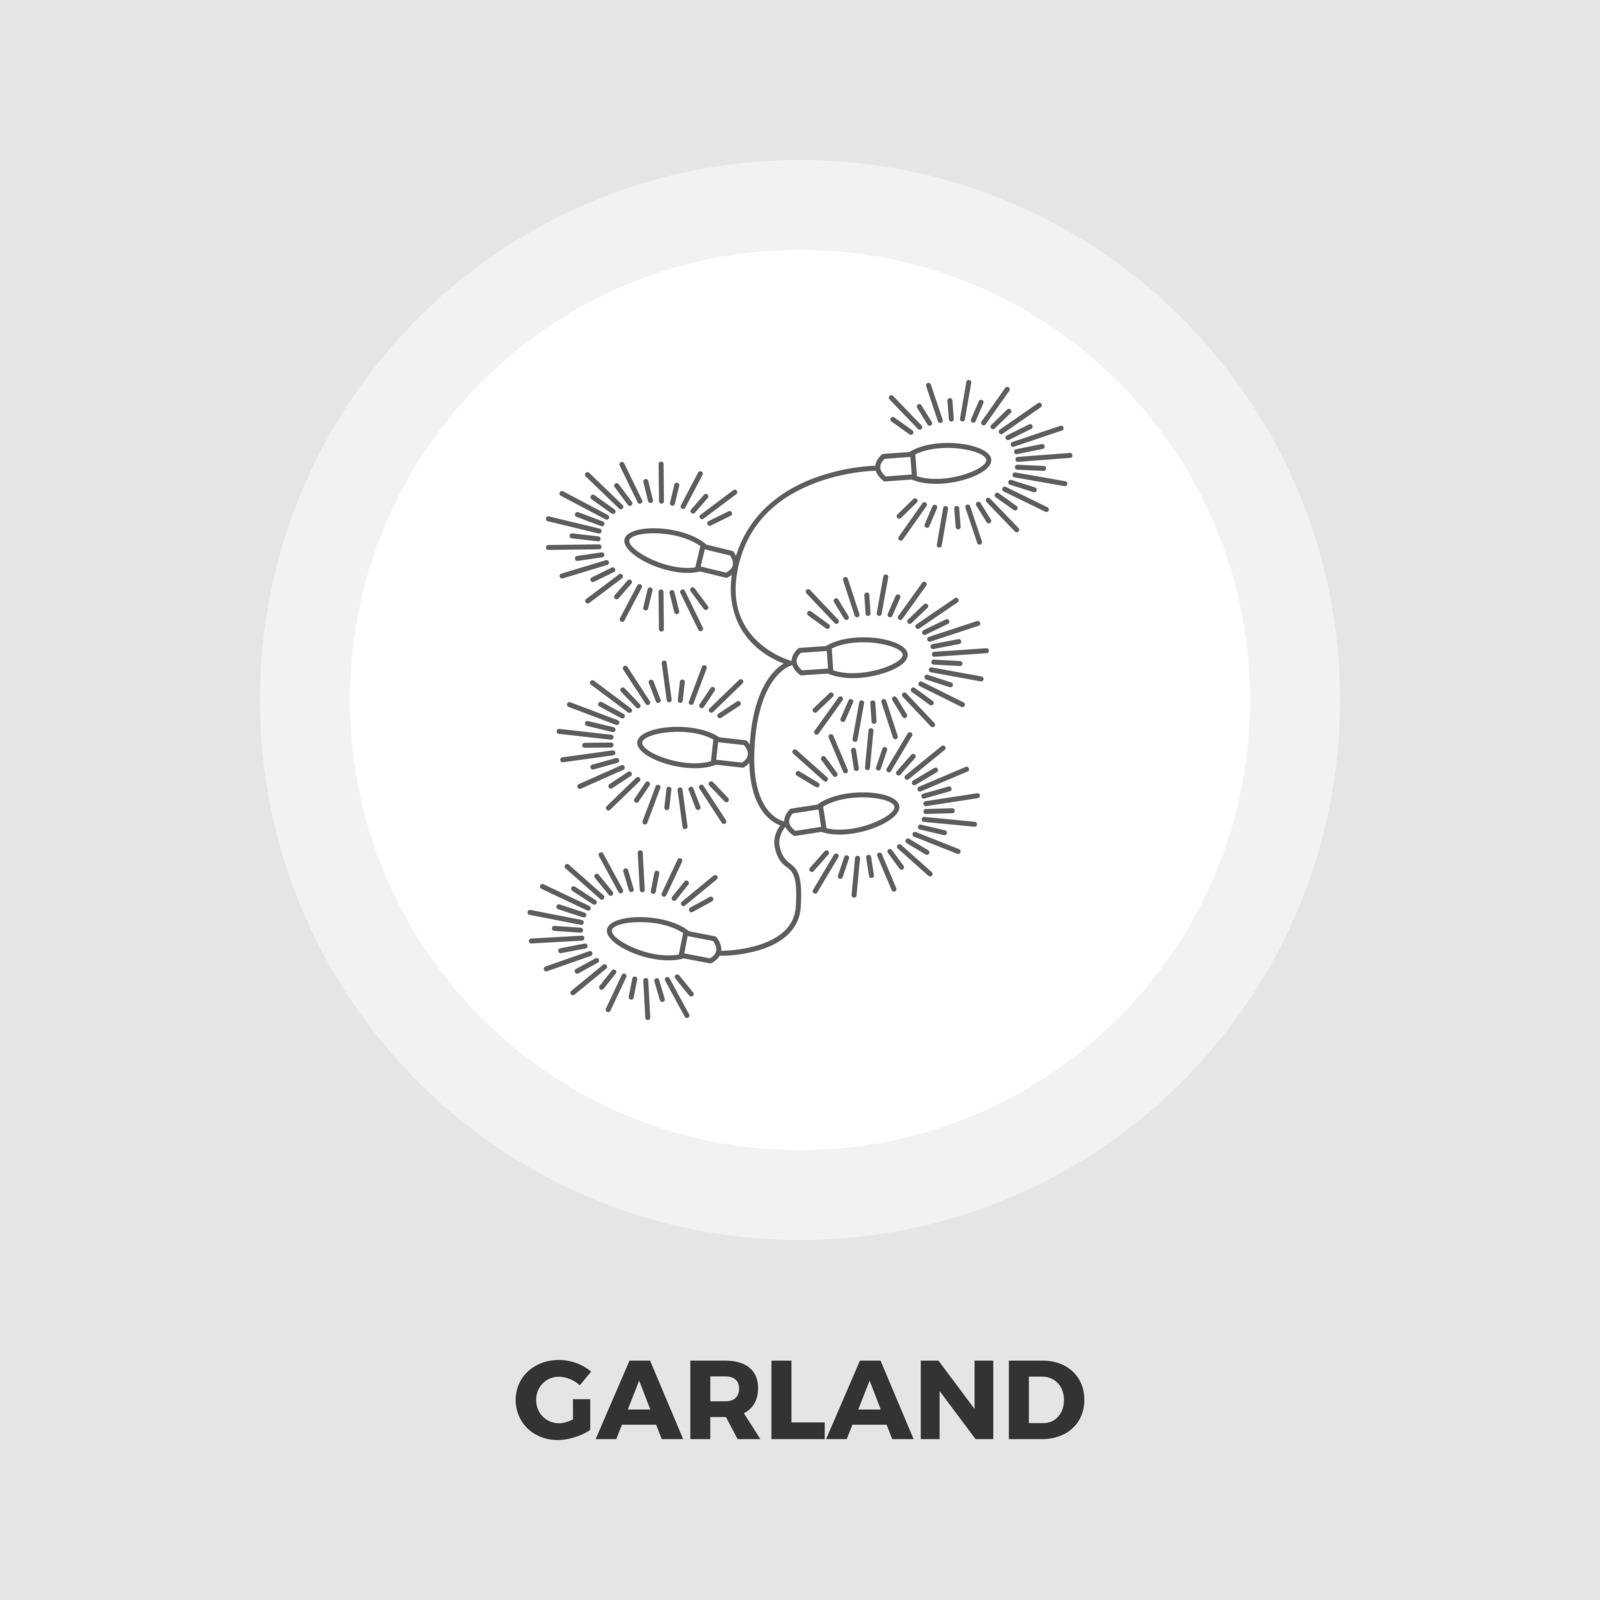 Garland icon vector. Flat icon isolated on the white background. Editable EPS file. Vector illustration.